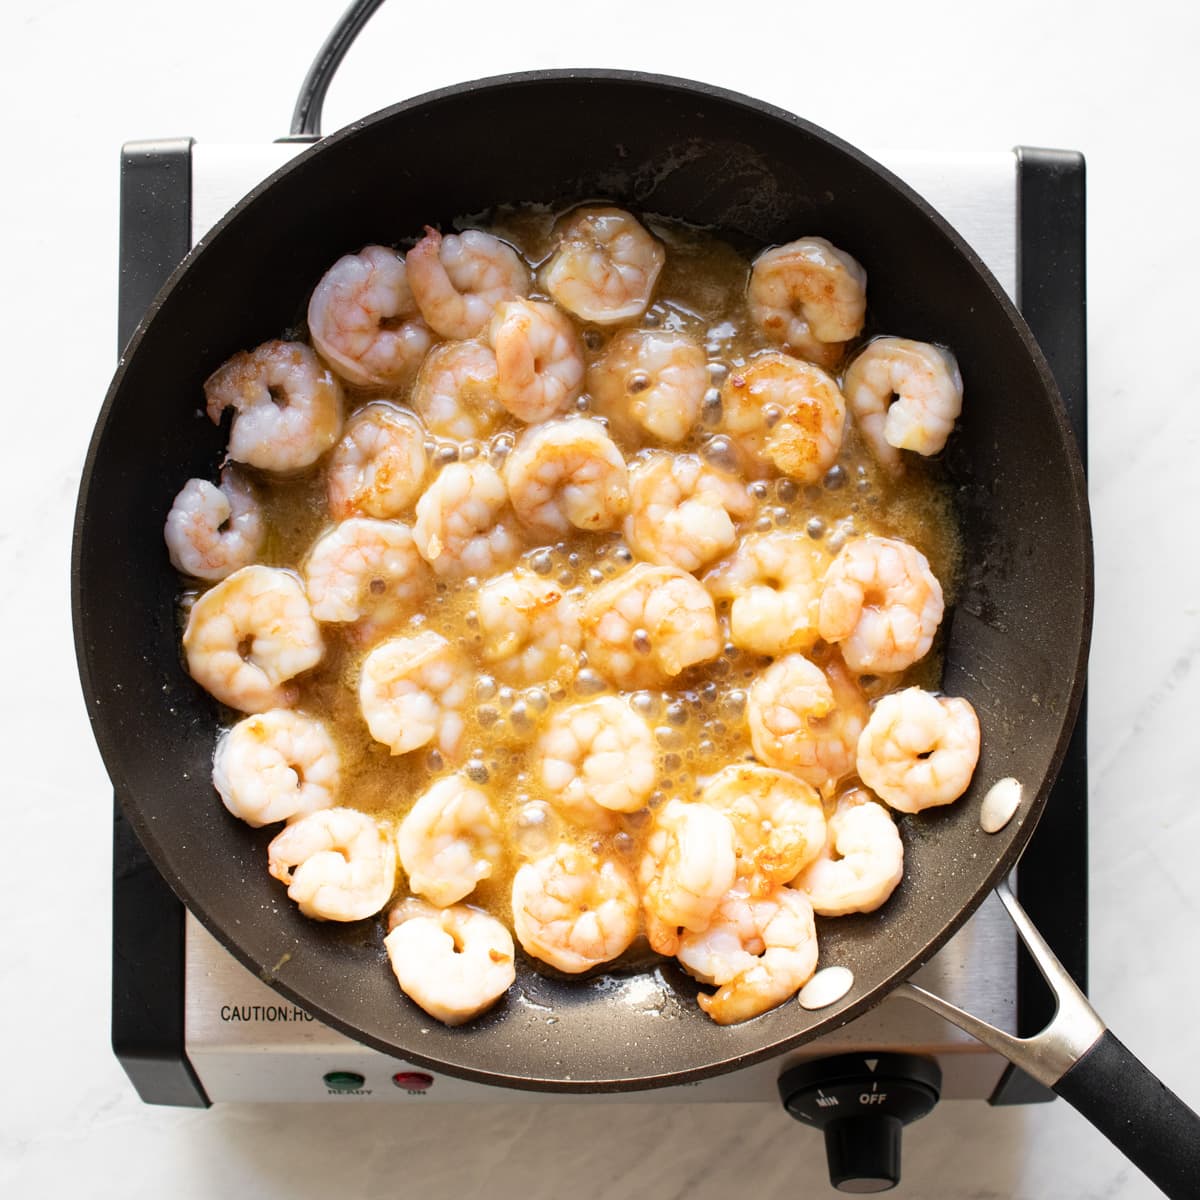 Maple-dijon mustard sauce bubbling with cooked shrimp.